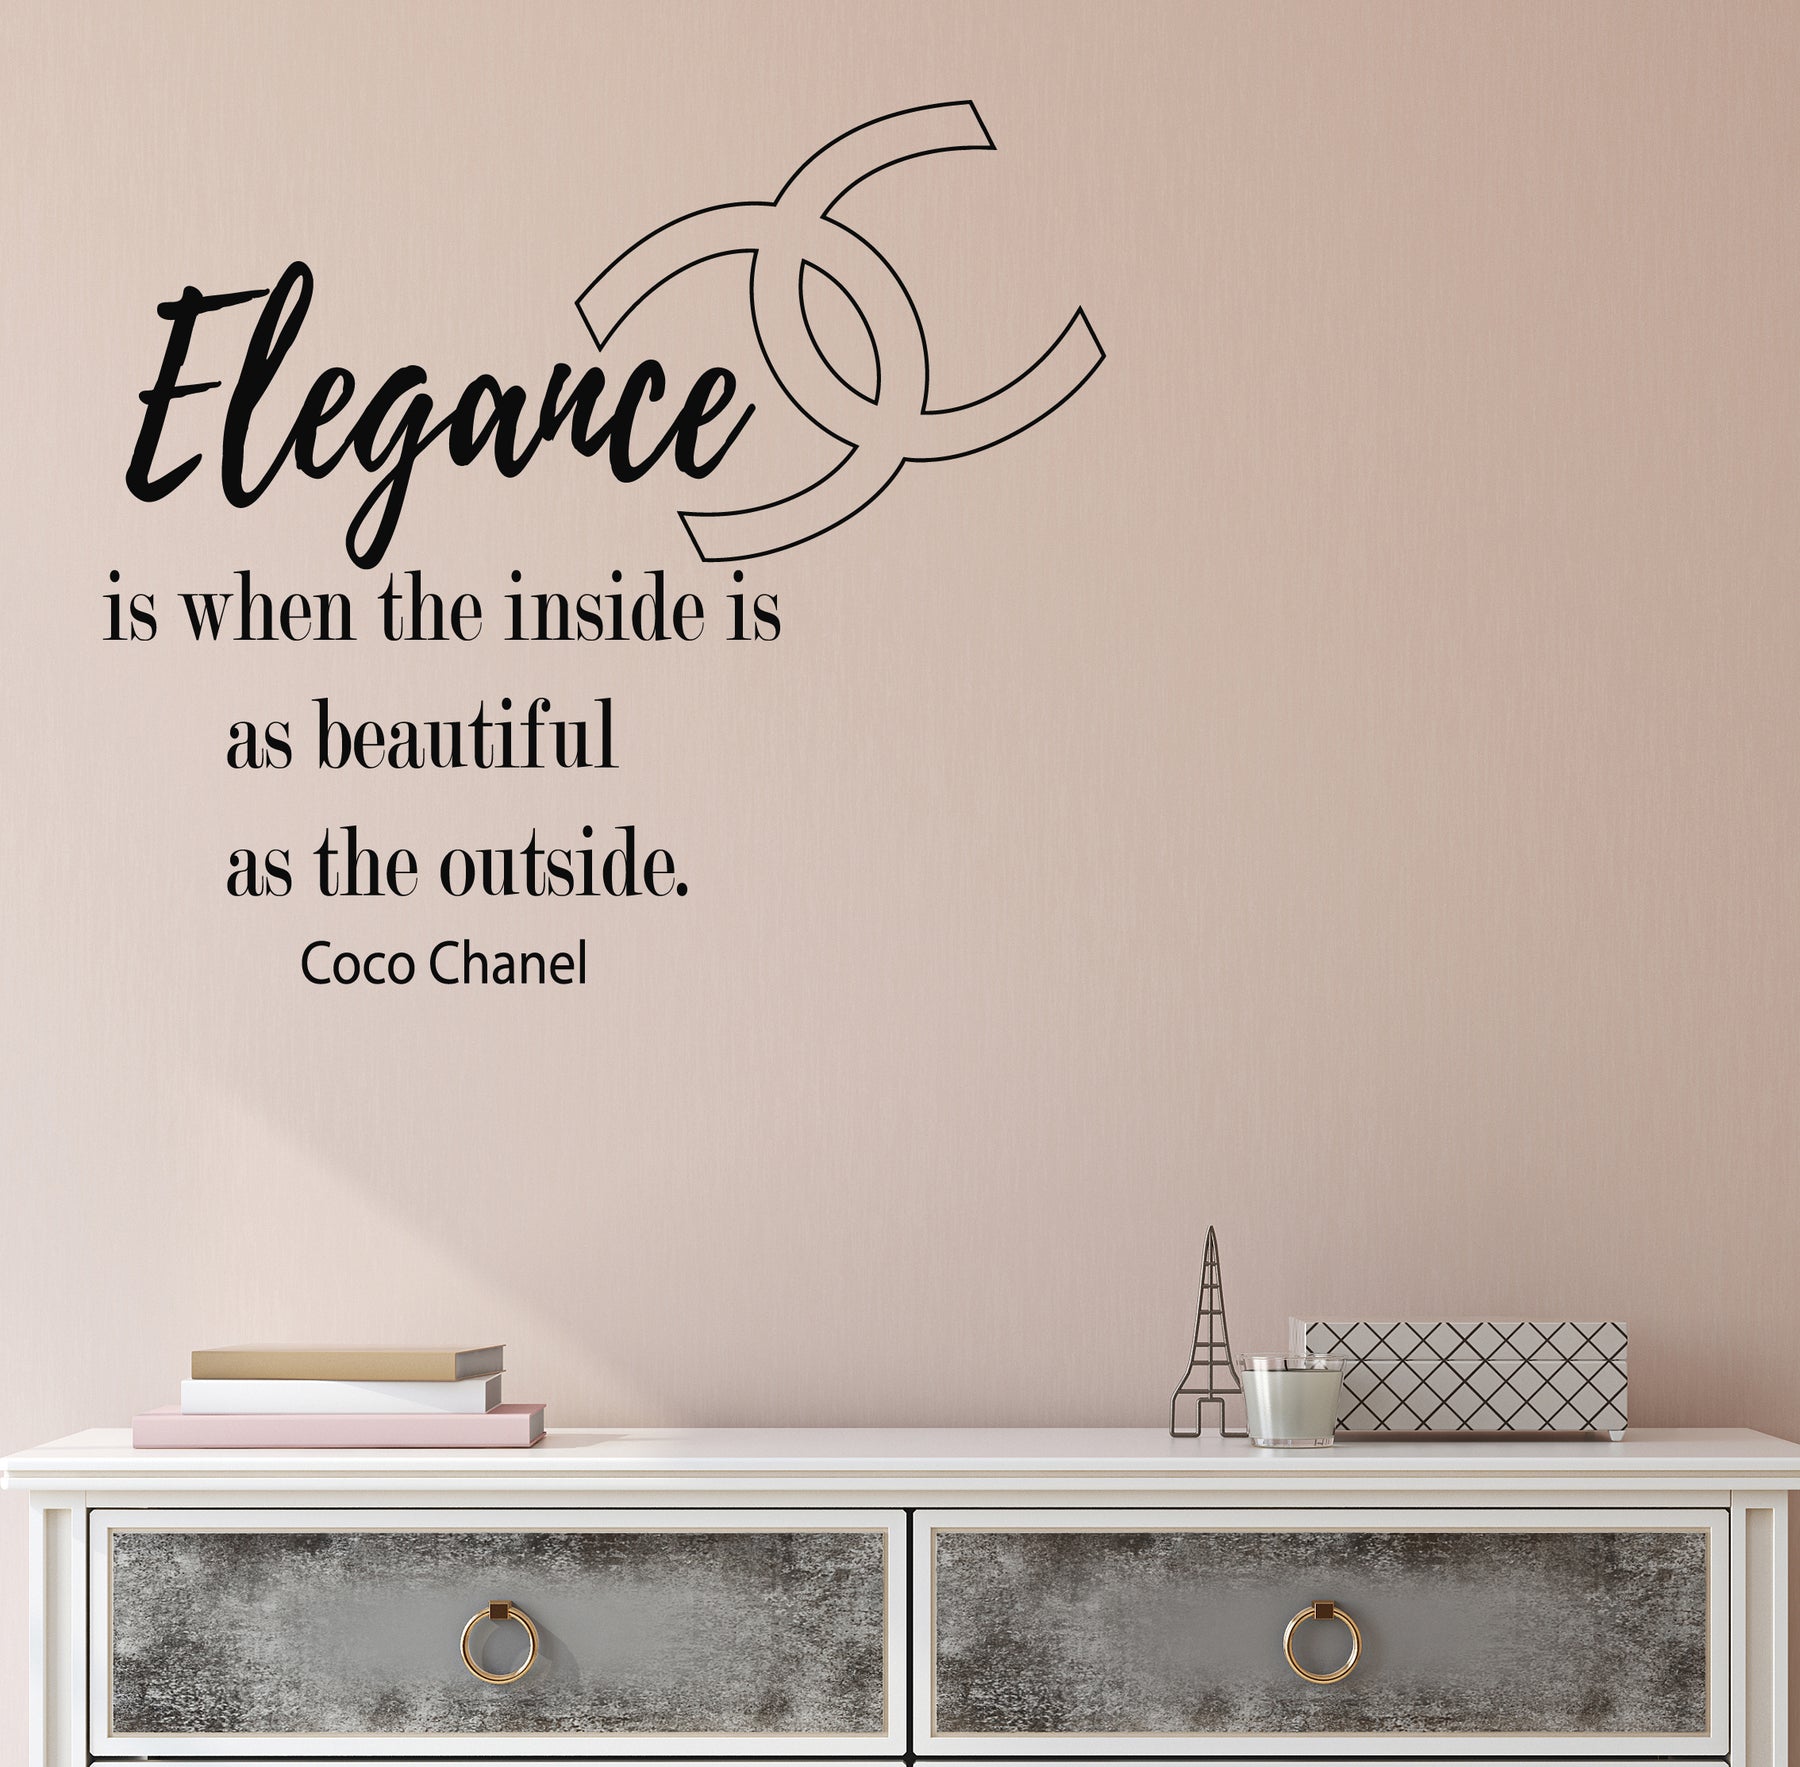 Coco Chanel Wall Quote Decal From Trendy Wall Designs